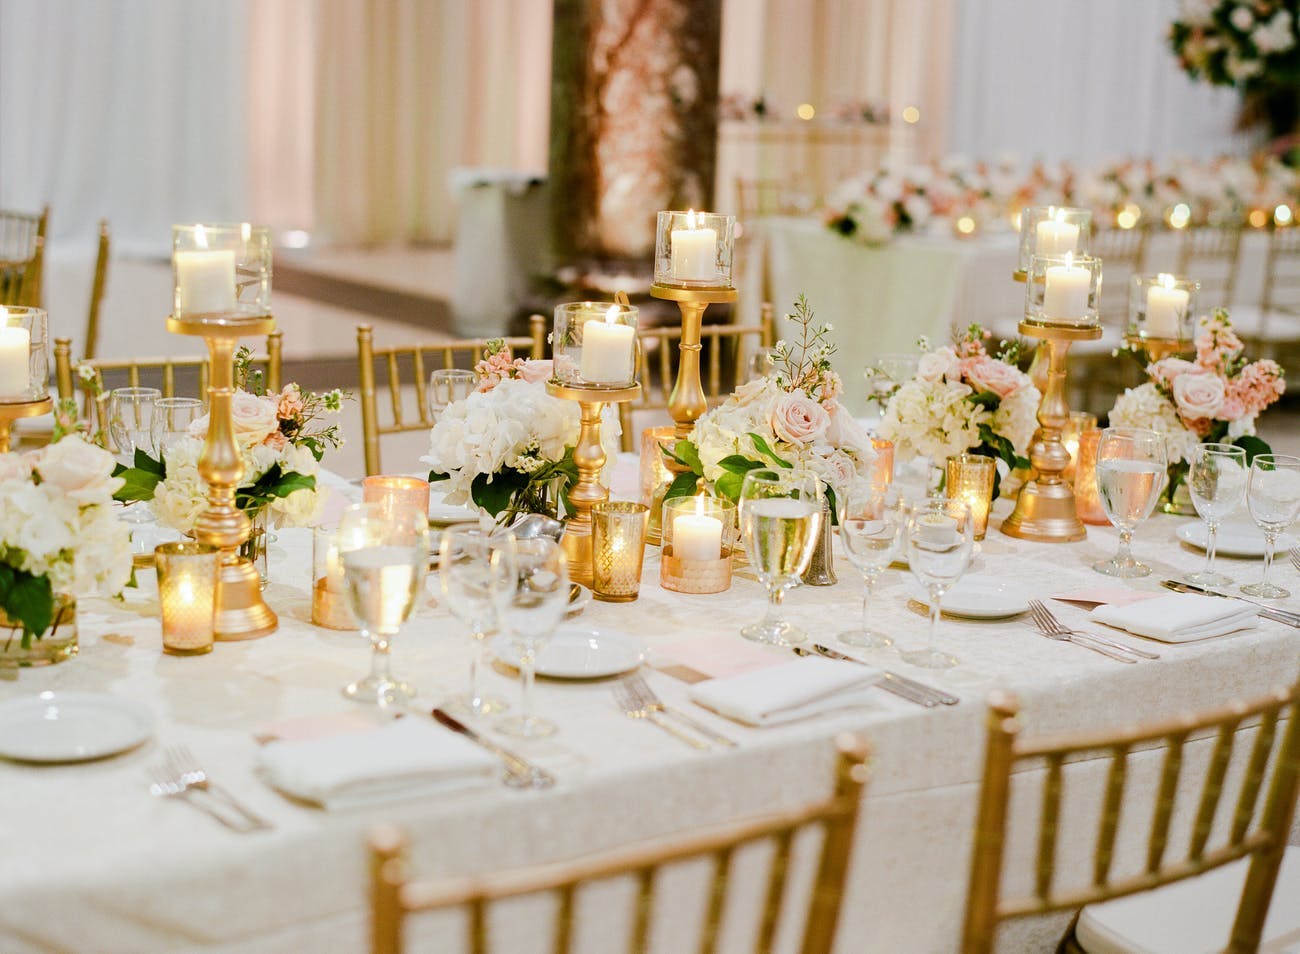 ivory and gold wedding centerpieces